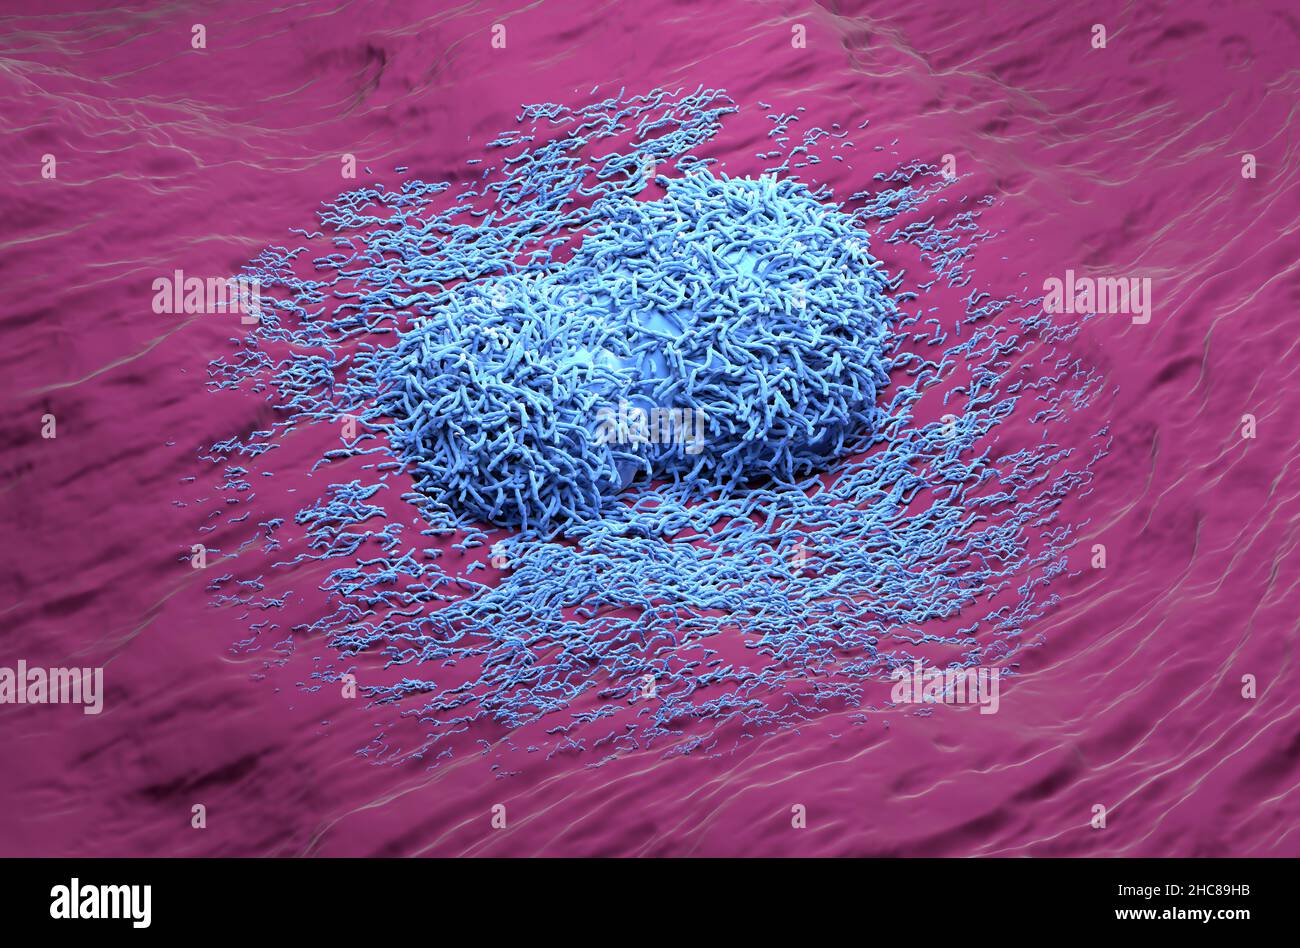 Liver cancer hepatoma blue color realistic isometric view 3d illustration Stock Photo